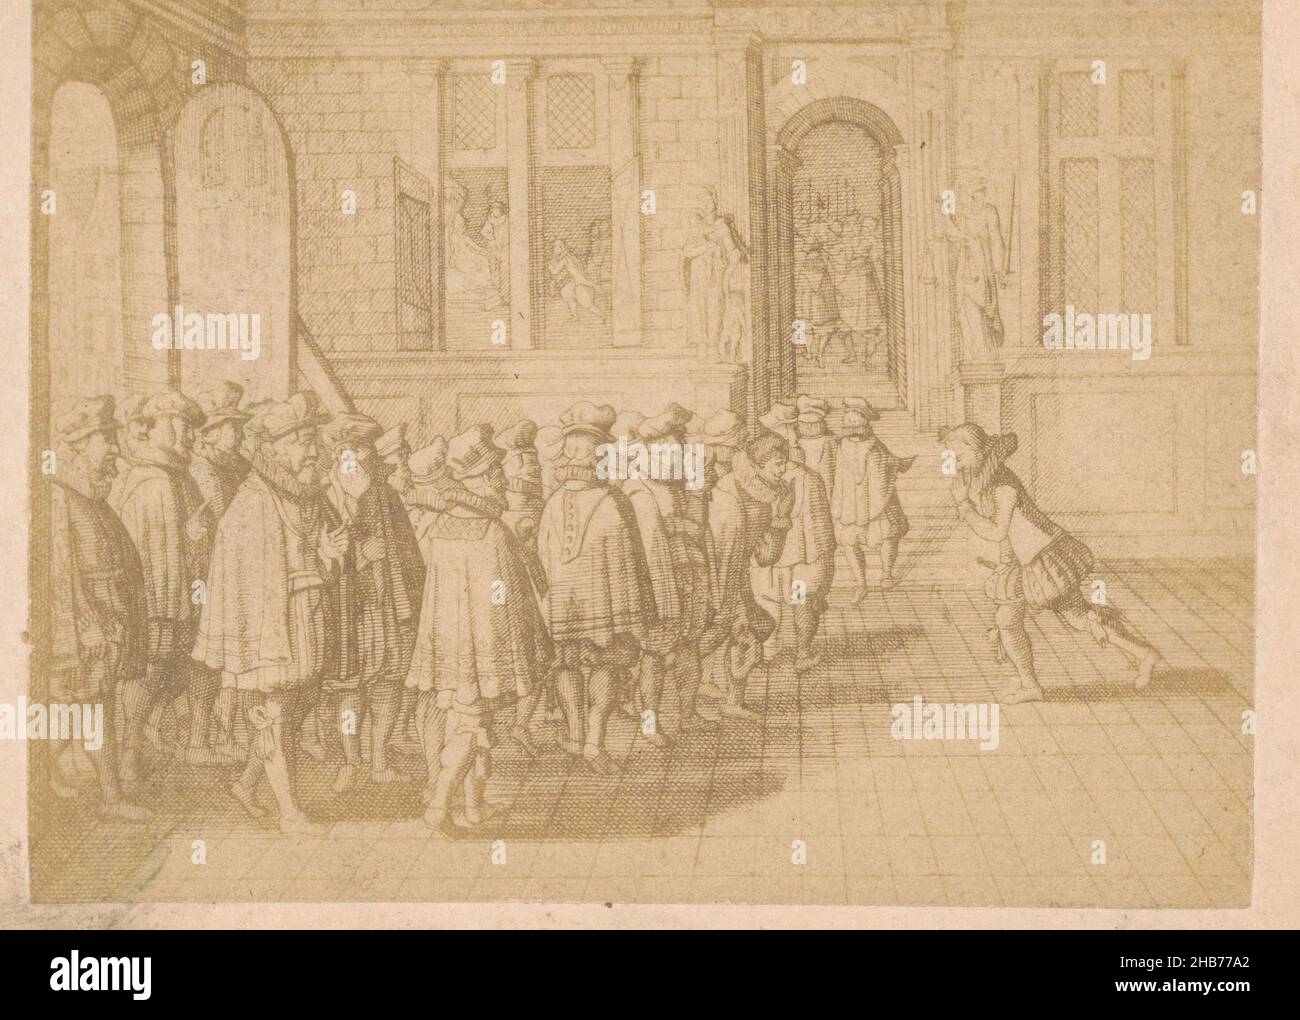 Photographic reproduction of an engraving of the presentation of an entreaty by Dutch nobles to the governess Margaret of Parma, anonymous, anonymous, Netherlands, 1850 - 1900, photographic support, cardboard, albumen print, height 57 mm × width 77 mmheight 62 mm × width 105 mm Stock Photo